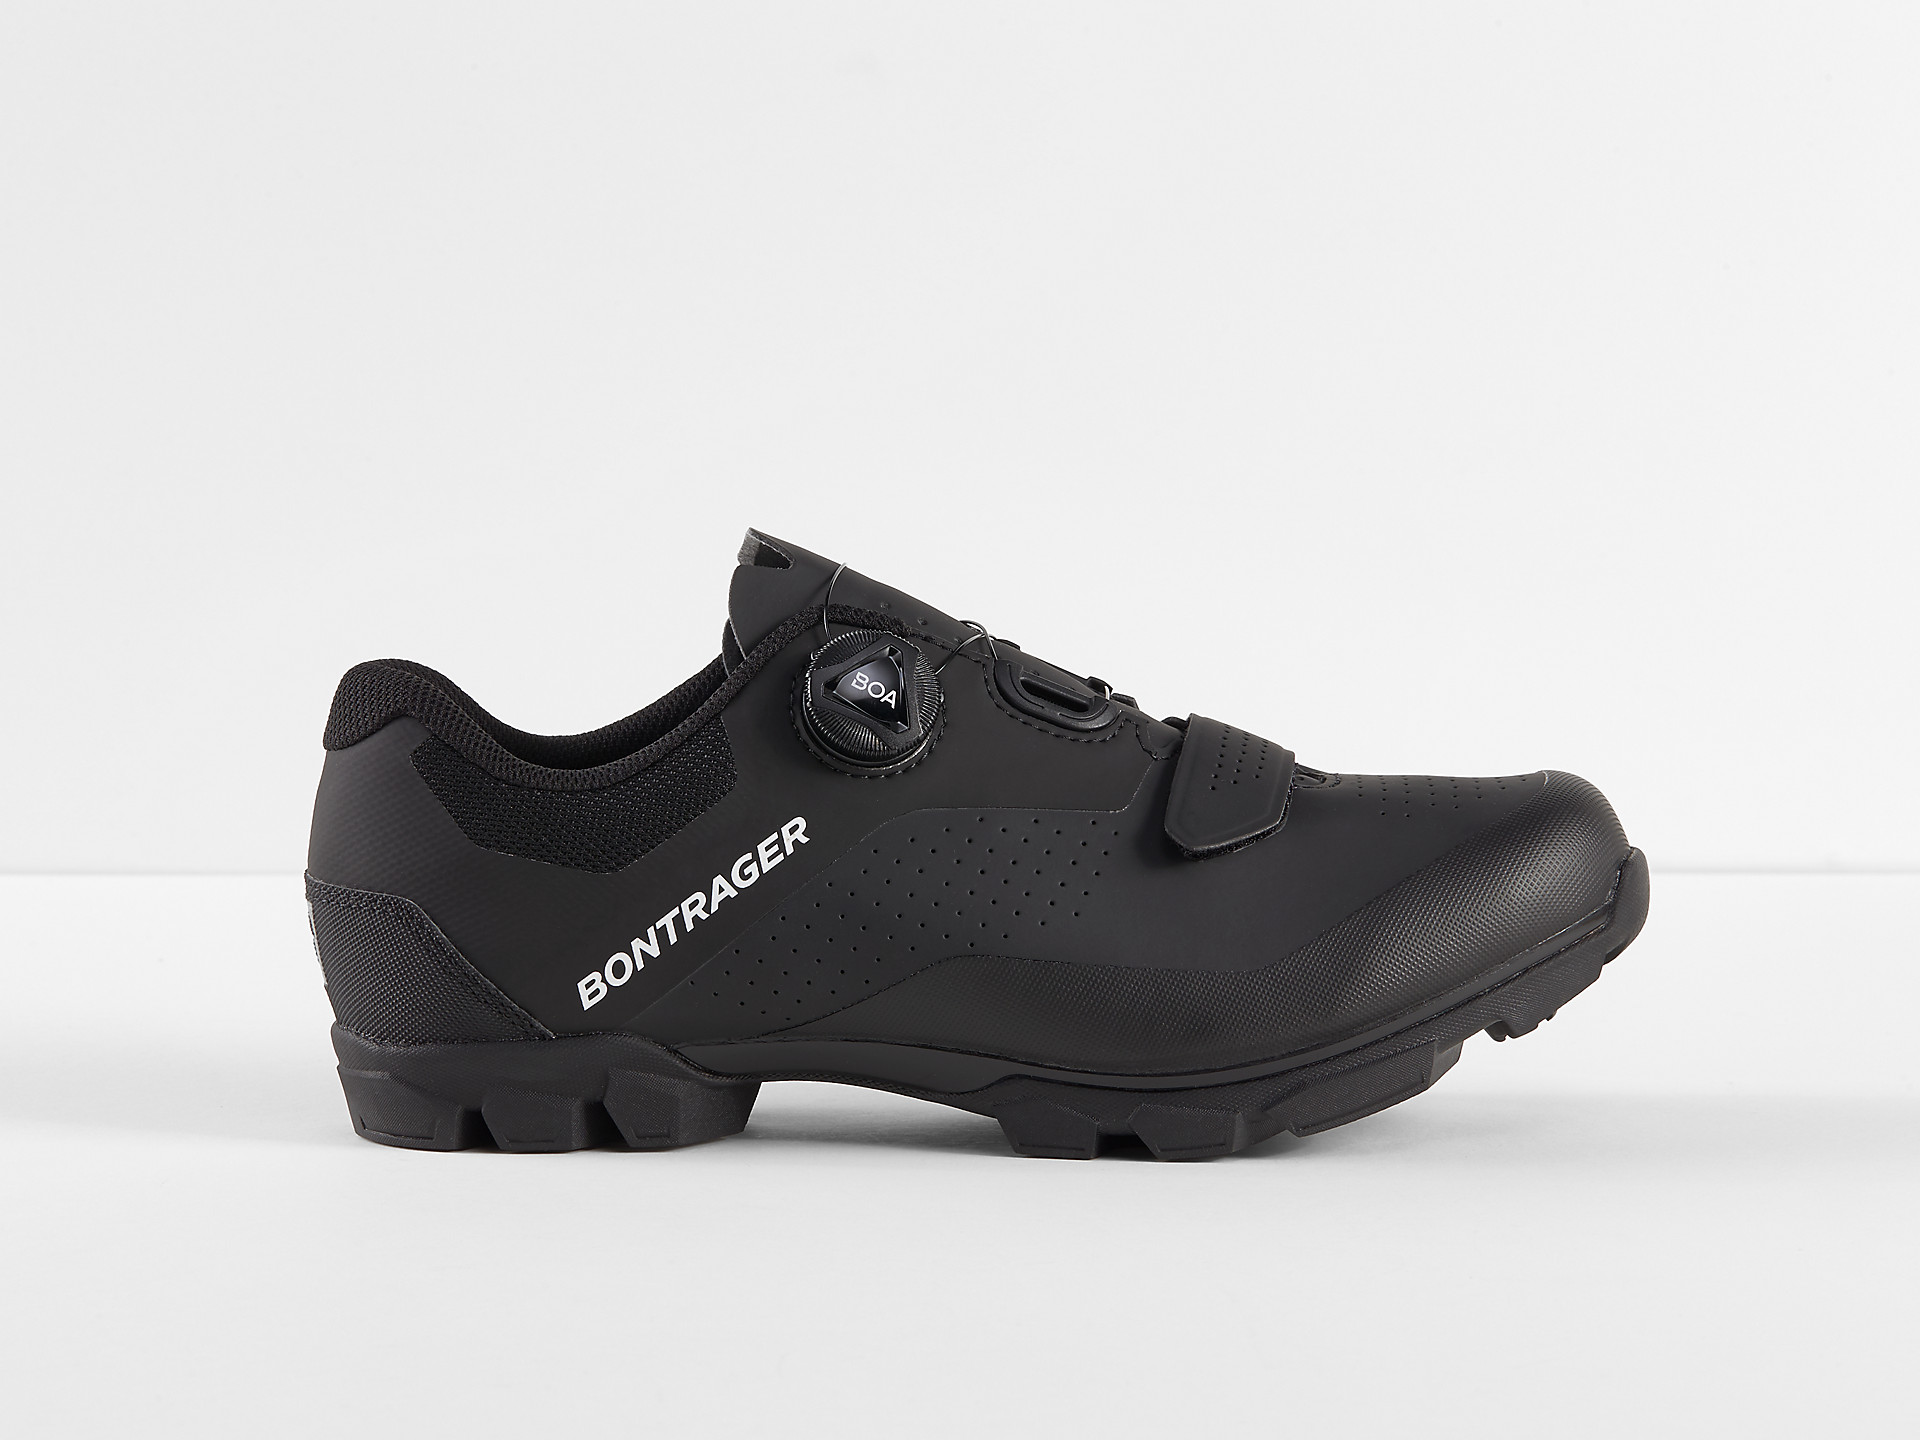 <a href="https://cycles-clement.be/product/bont-chaussures-foray-vtt-41-black/">BONT CHAUSSURES FORAY VTT 41 BLACK</a>